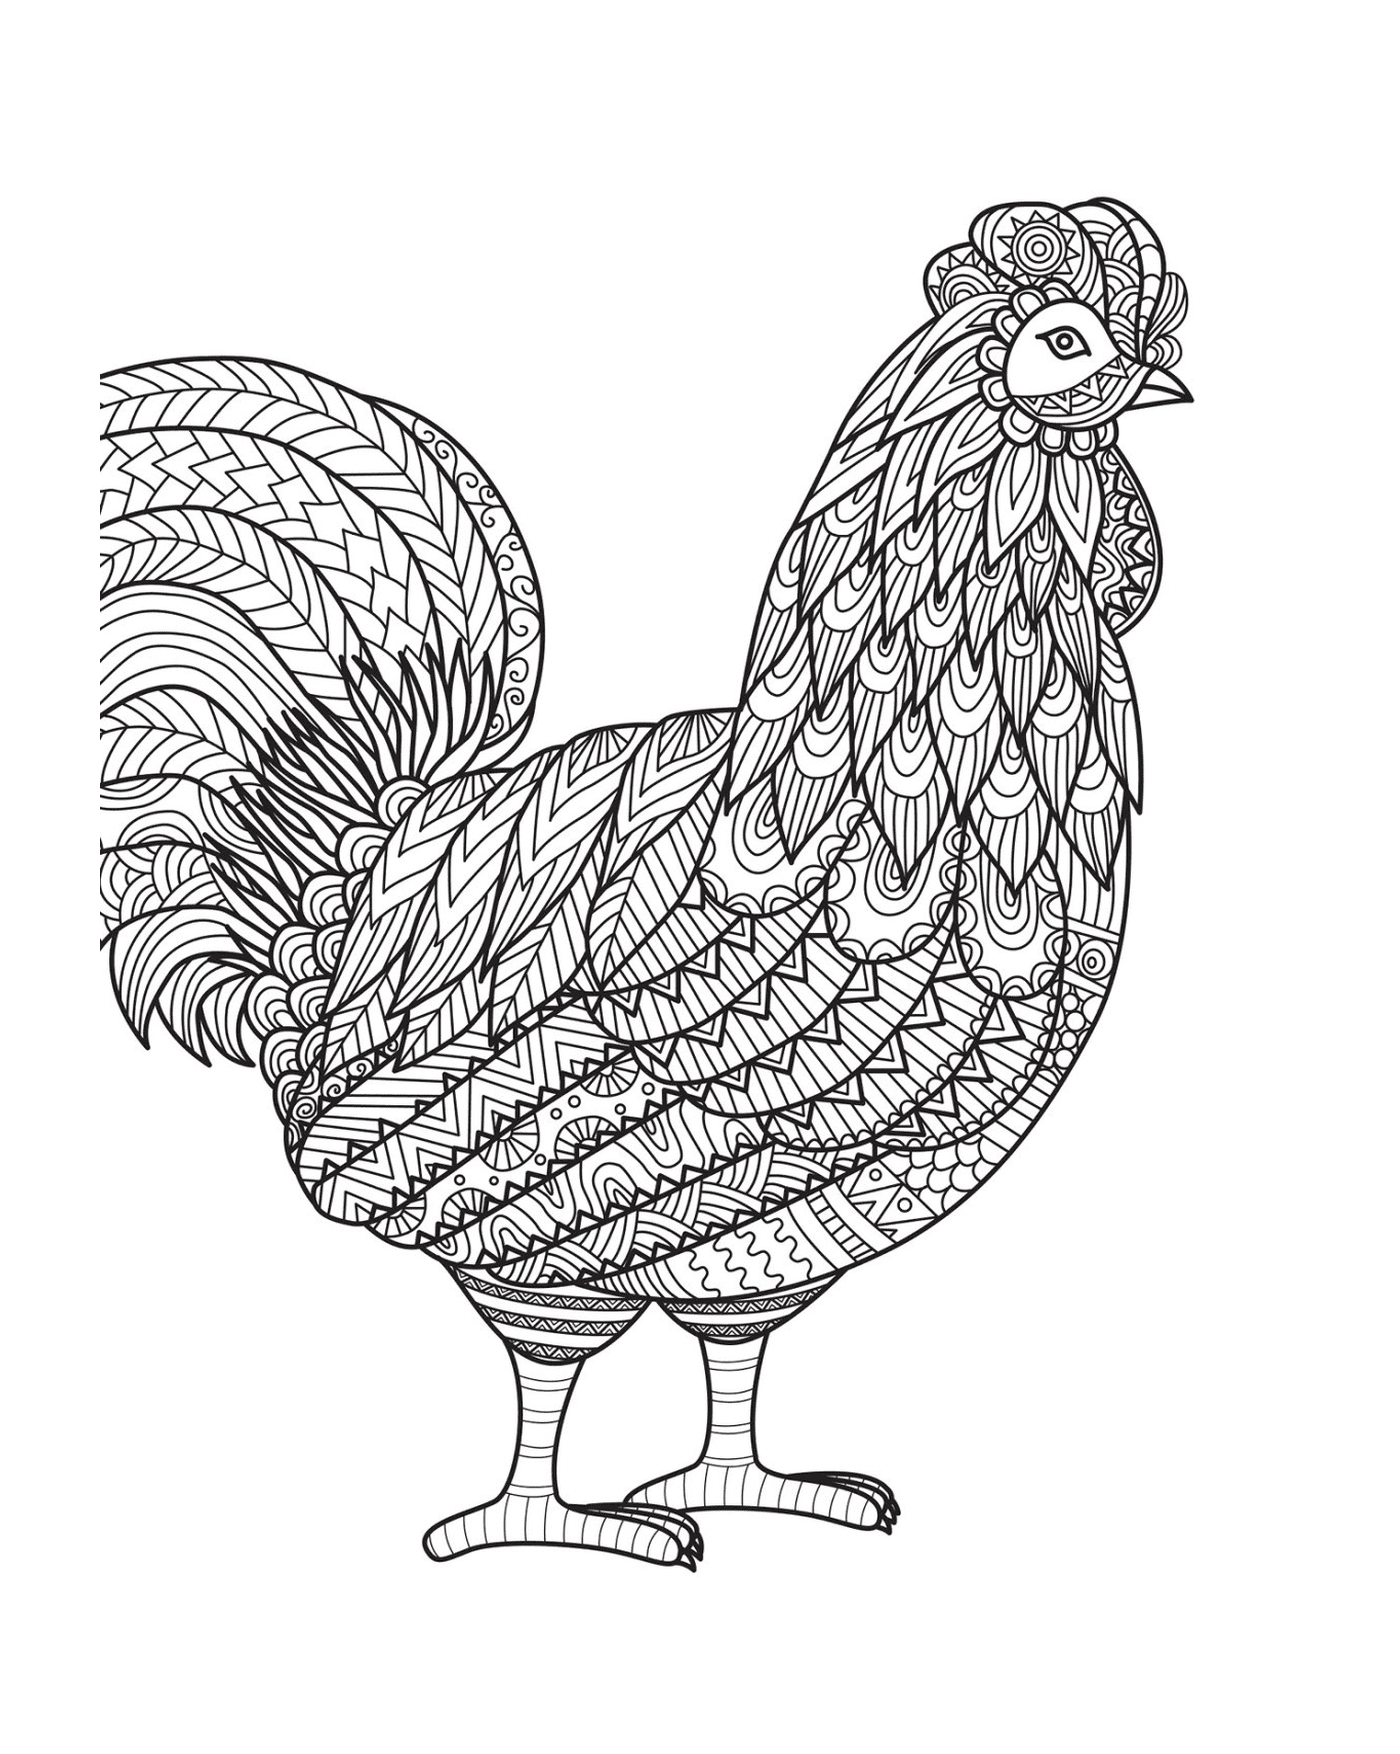  Proud, majestic adult rooster 